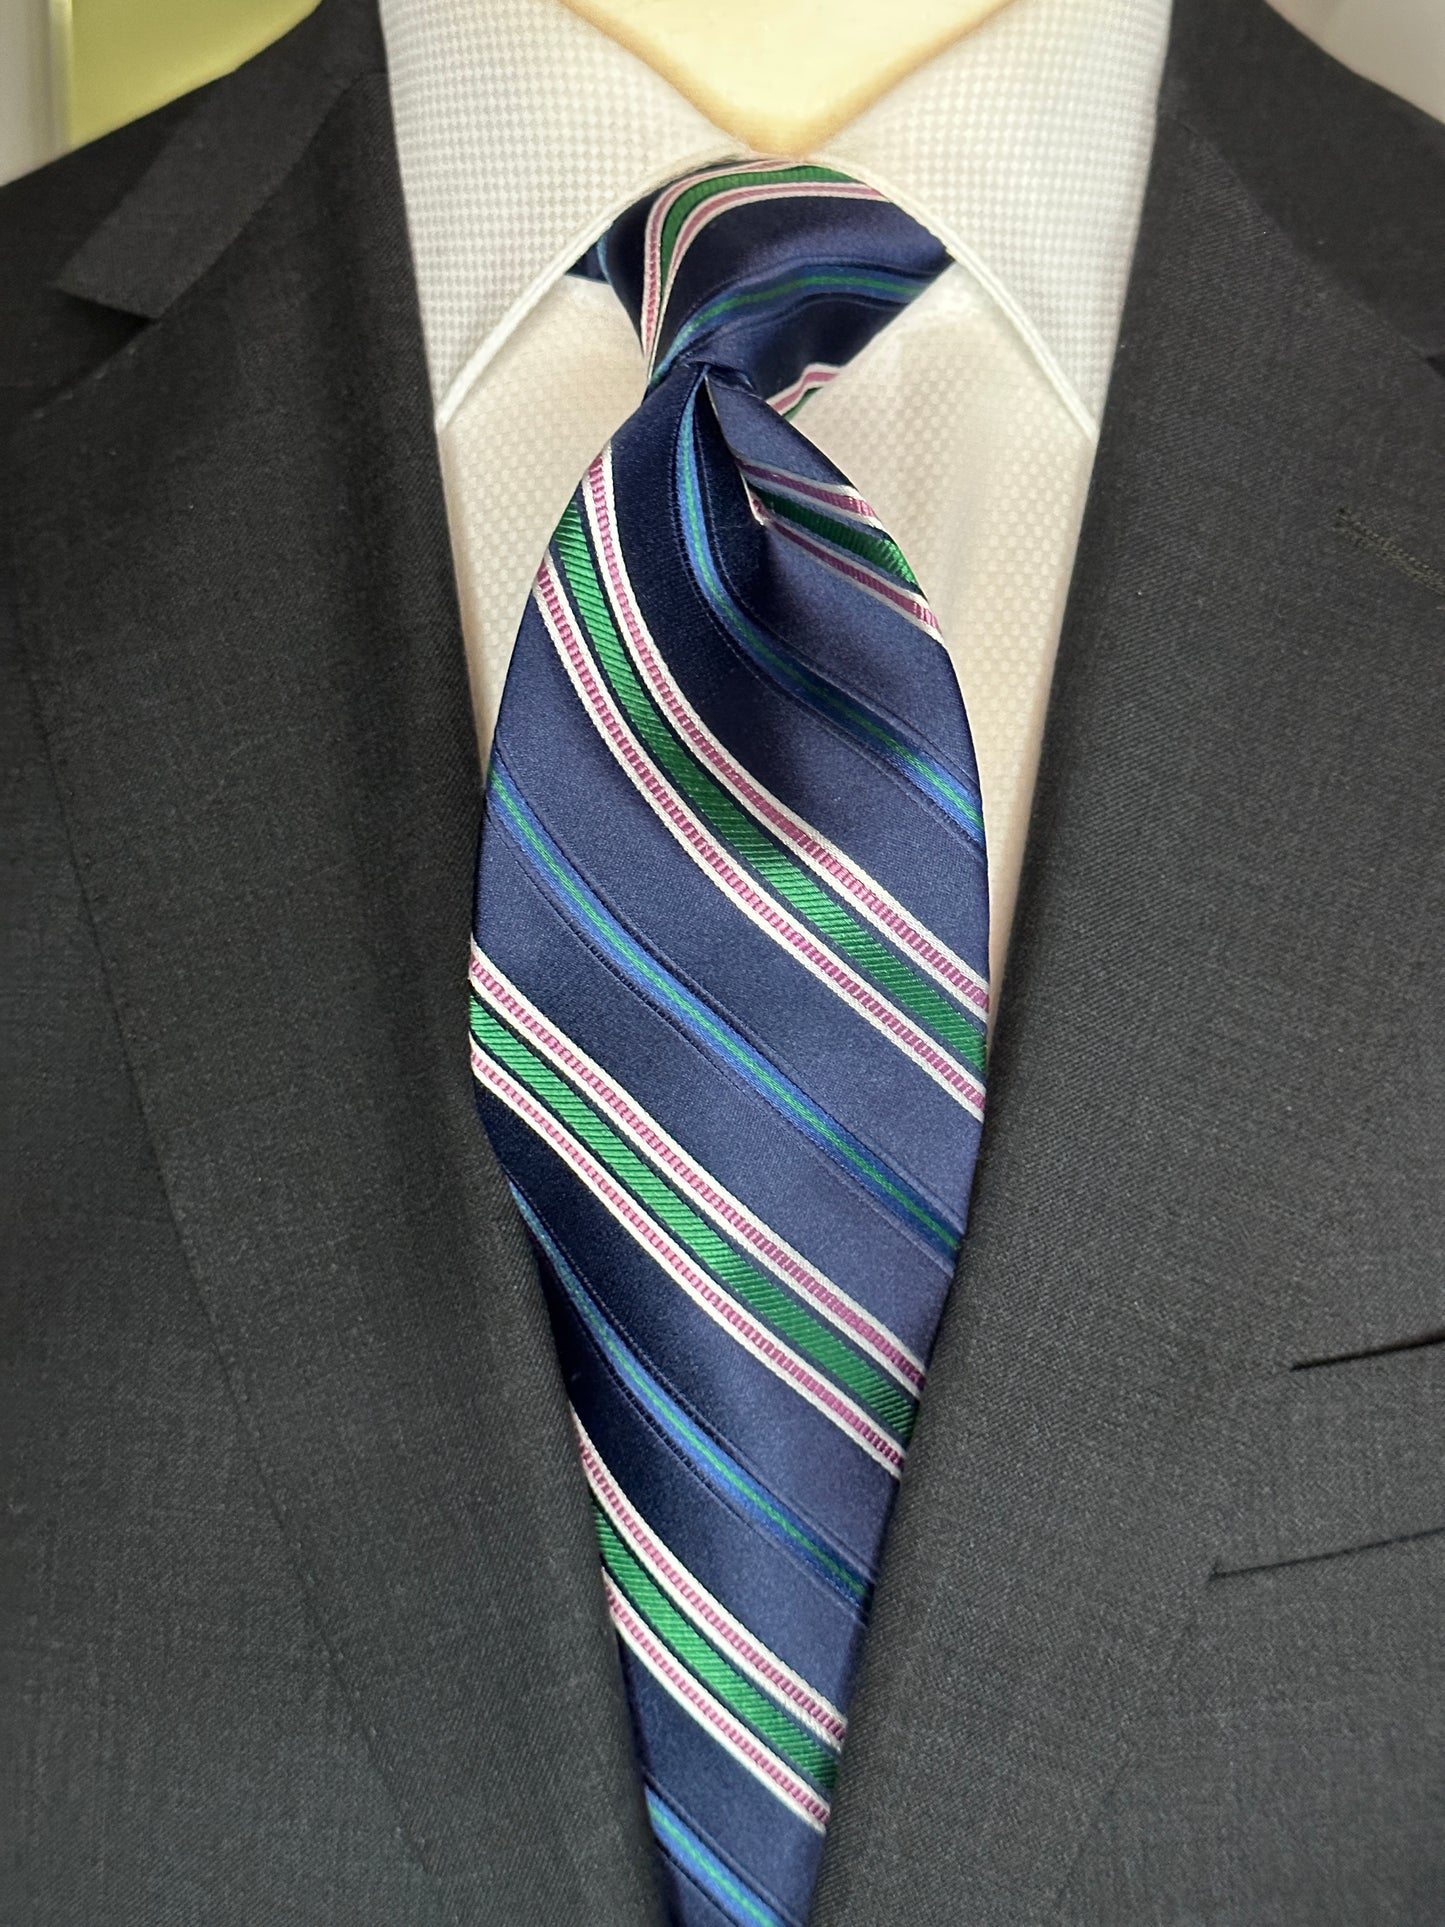 A multistripe tie has many functions. This 100% silk navy blue base tie has multiple types of stripes running through it. Light blue, rose, white ands green impact this toe in different widths. The multistripe tie allows for many types of colorations and patterns in shirts and suits. Probably the most versatile. 